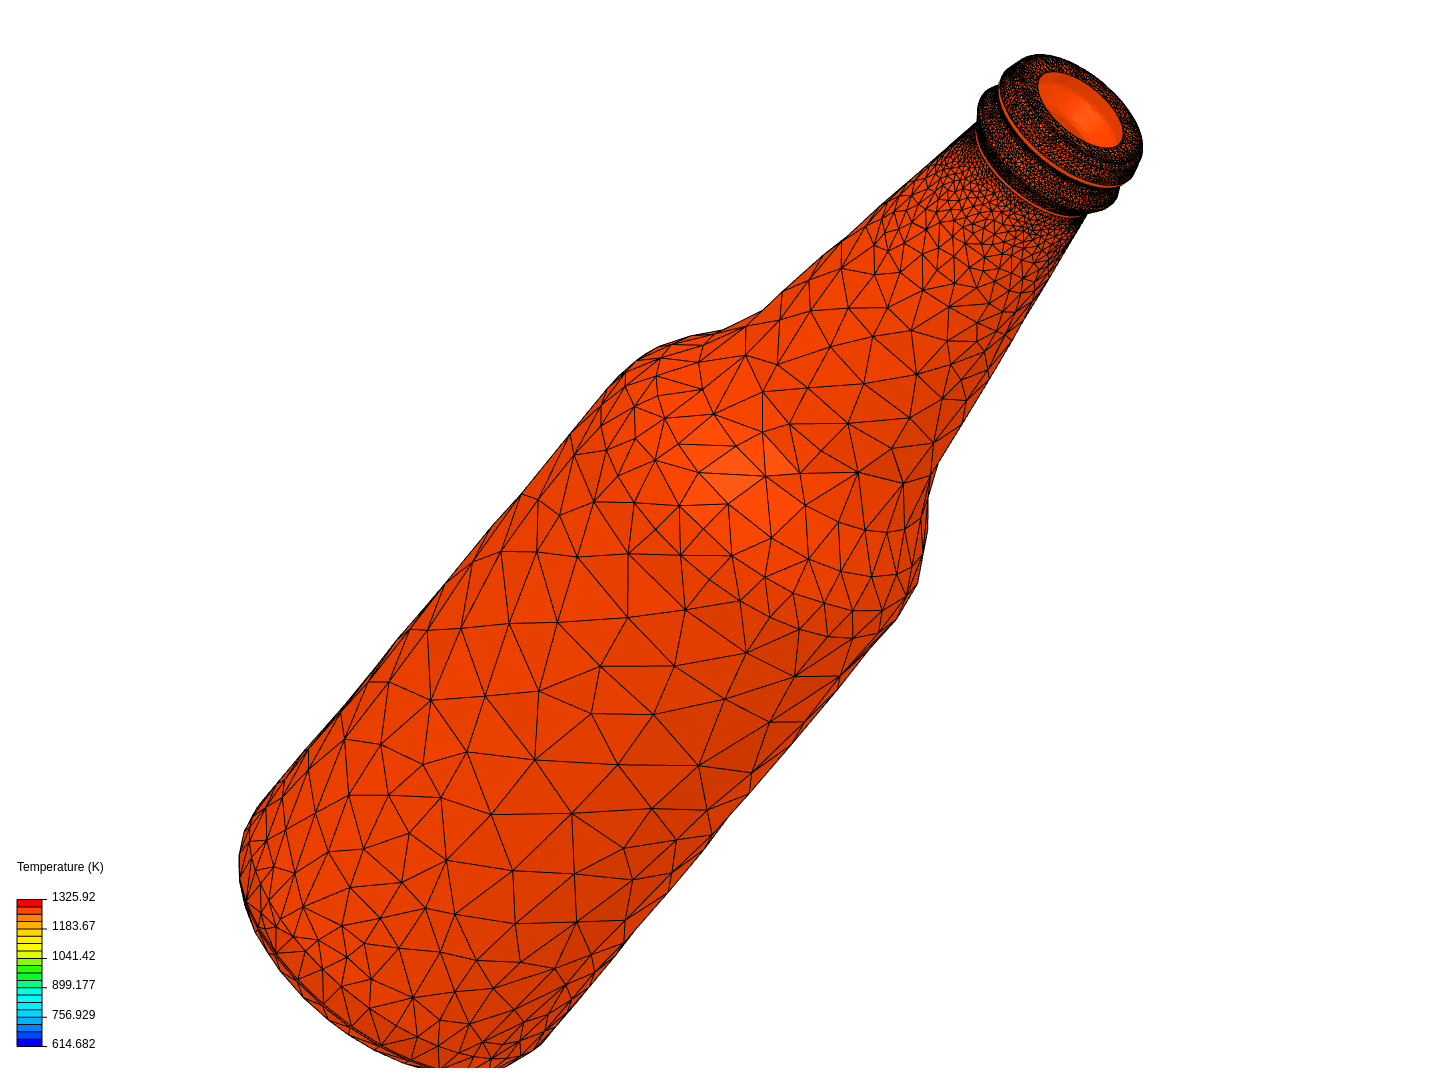 Glass Bottle Thermal analysis | SimScale